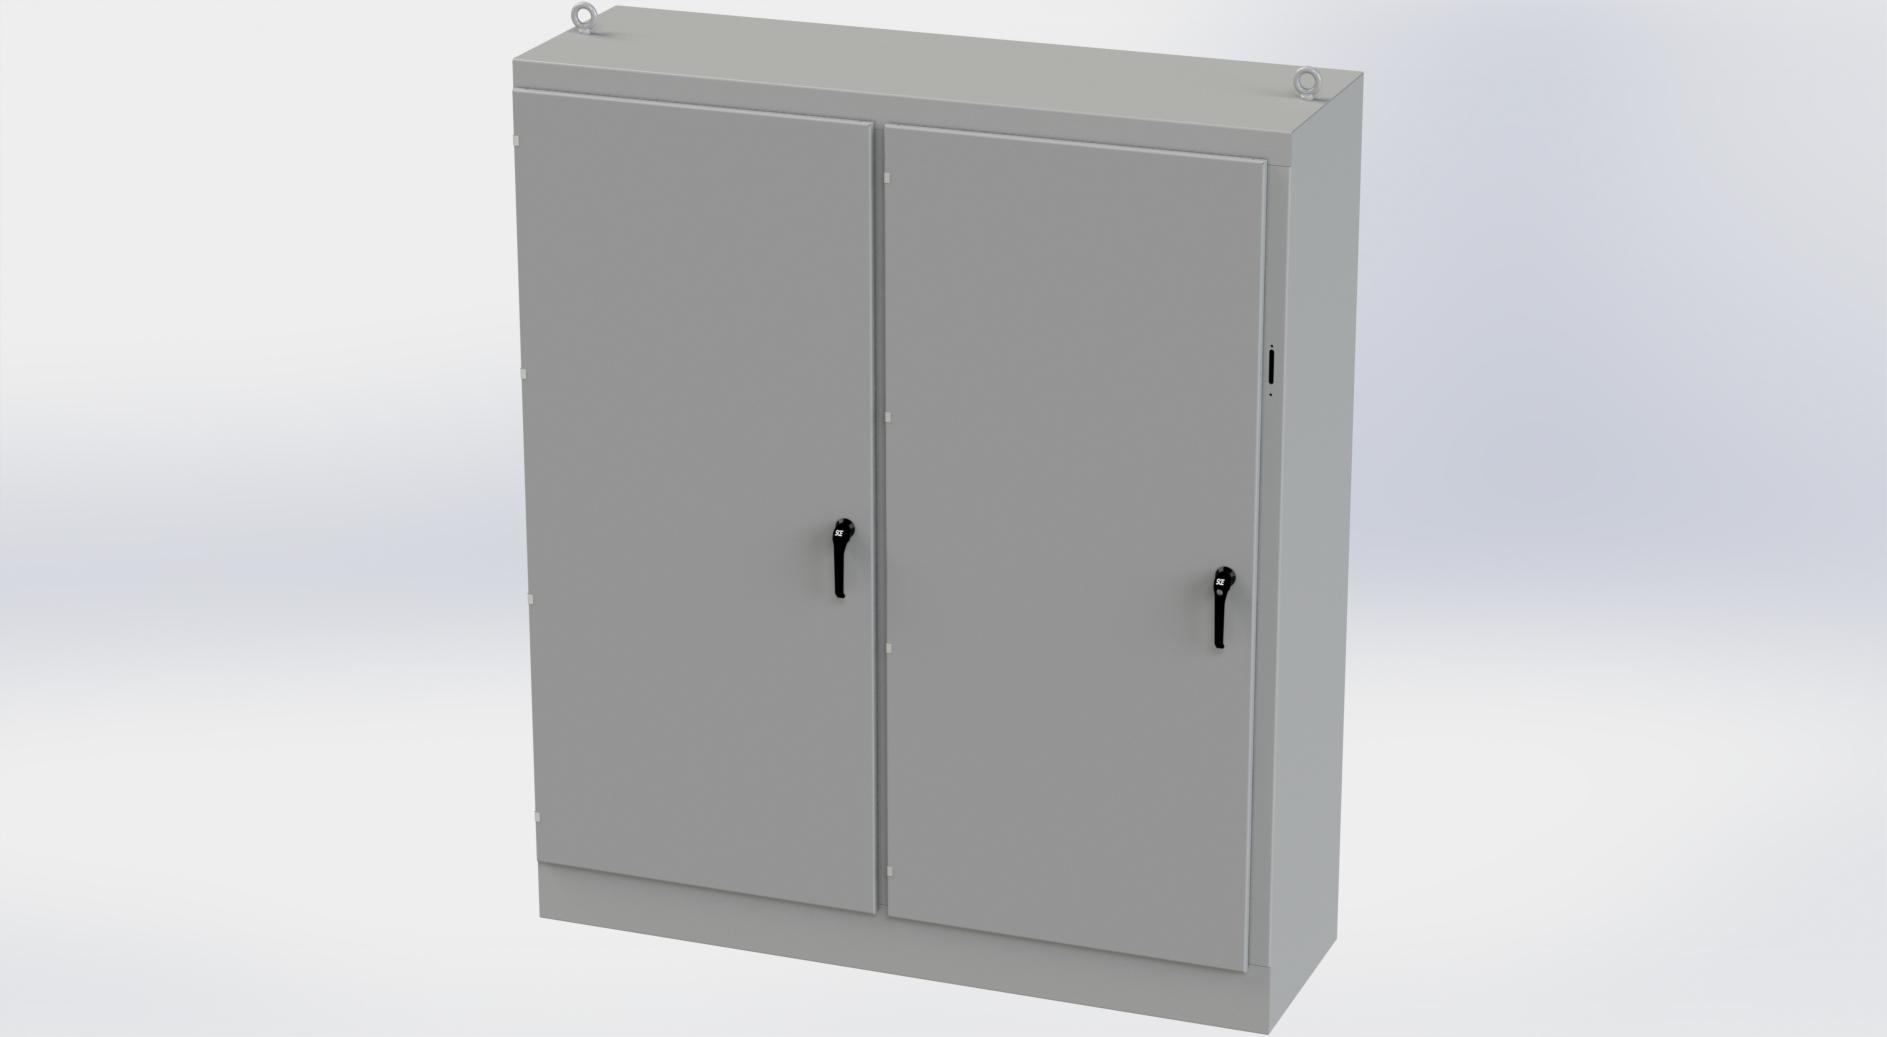 Saginaw Control SCE-90XM7824 2DR XM Enclosure, Height:90.00", Width:77.75", Depth:24.00", ANSI-61 gray powder coating inside and out. Sub-panels are powder coated white.